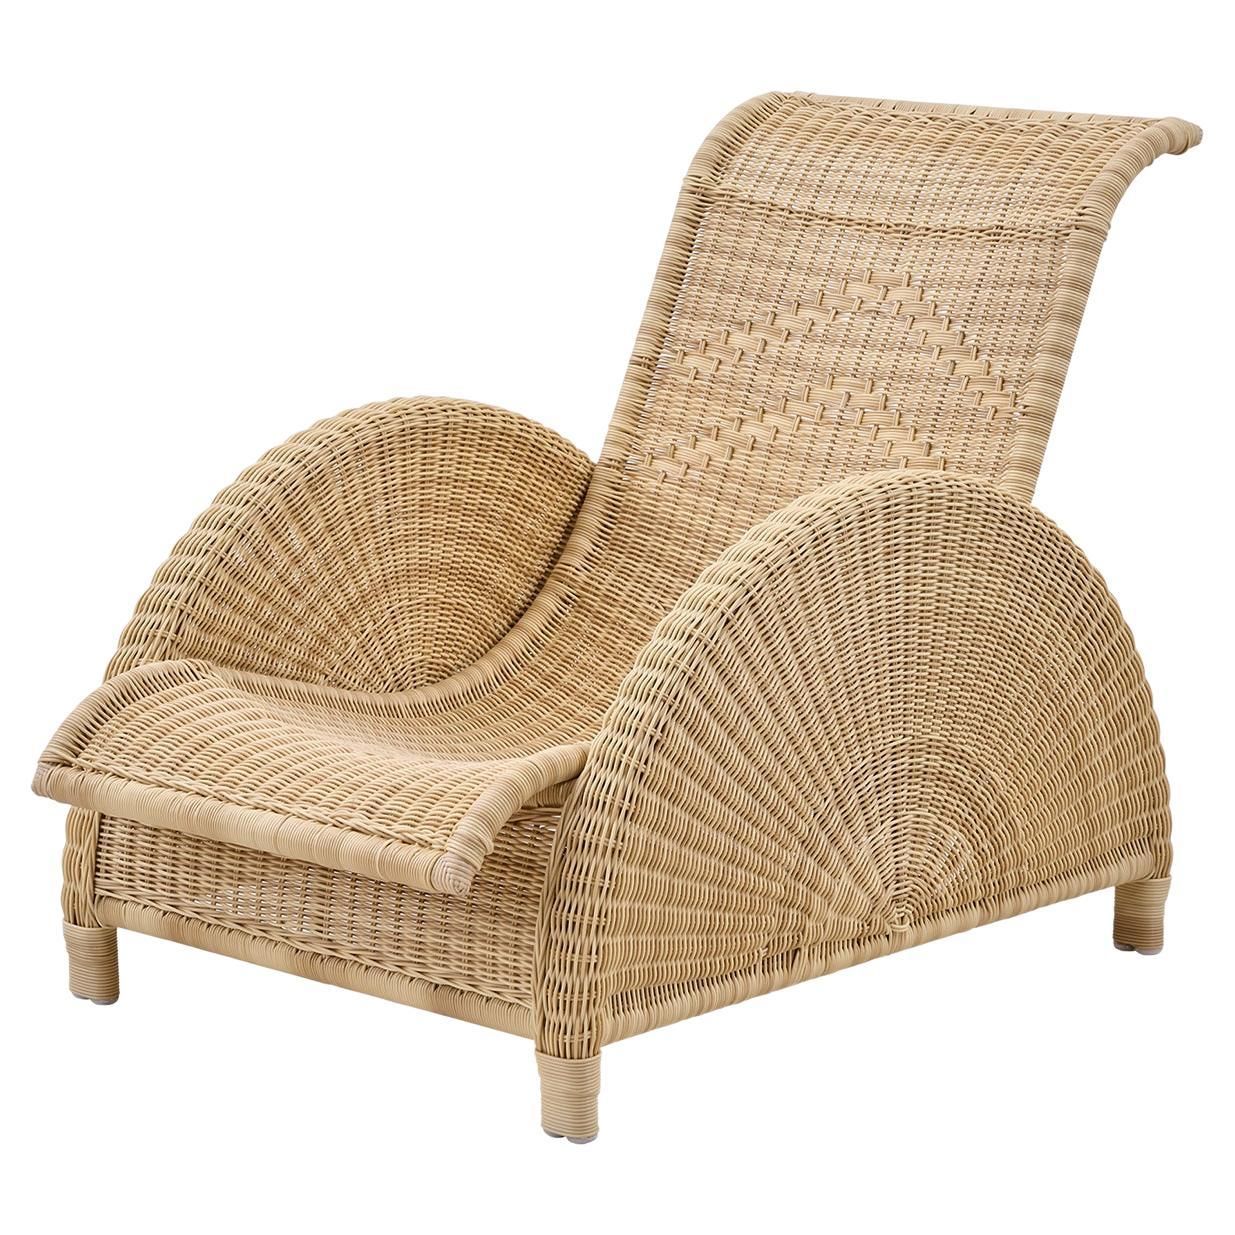 Rattan Armchair : The Versatile and Stylish Rattan Armchair Perfect for Any Space